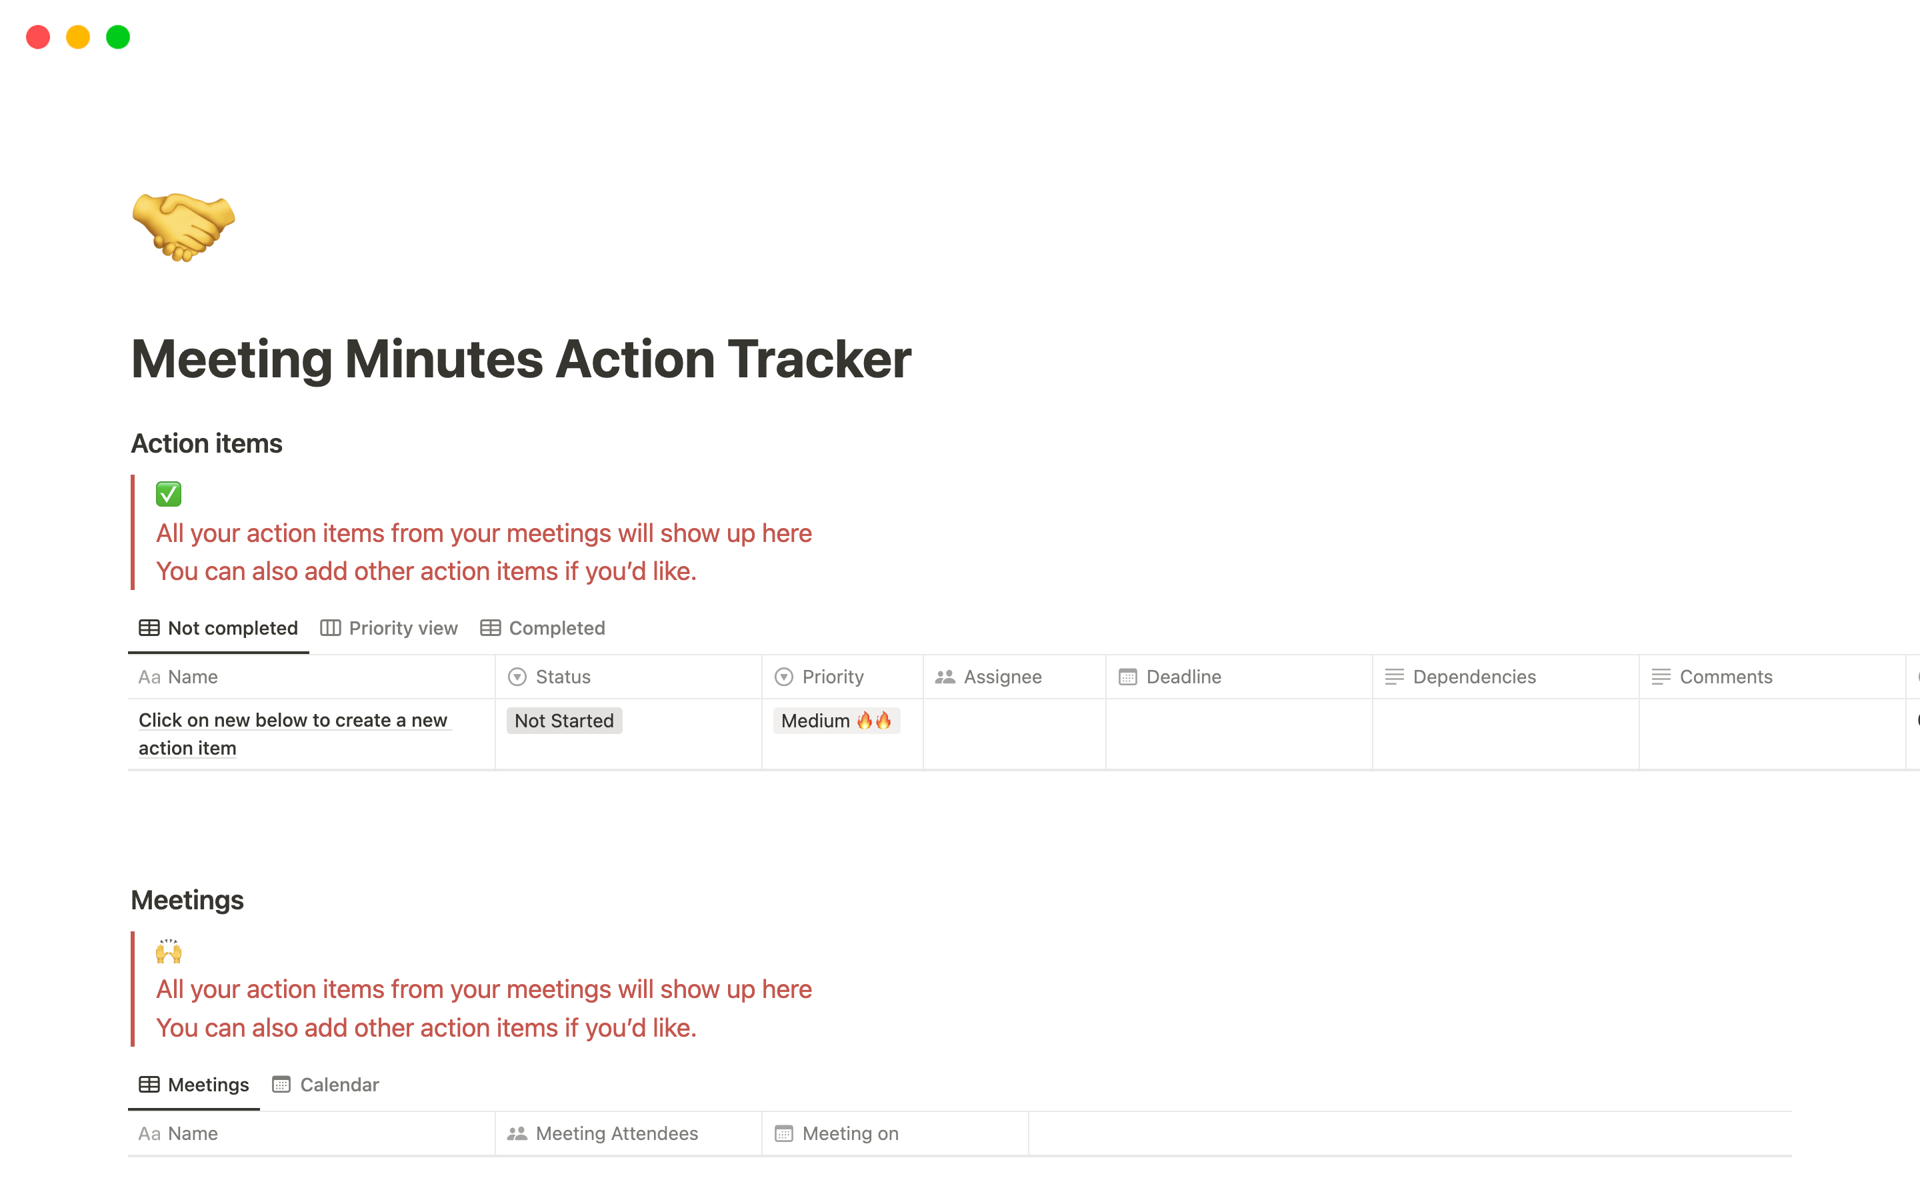 Automate and bring out all your meeting action items in one place.